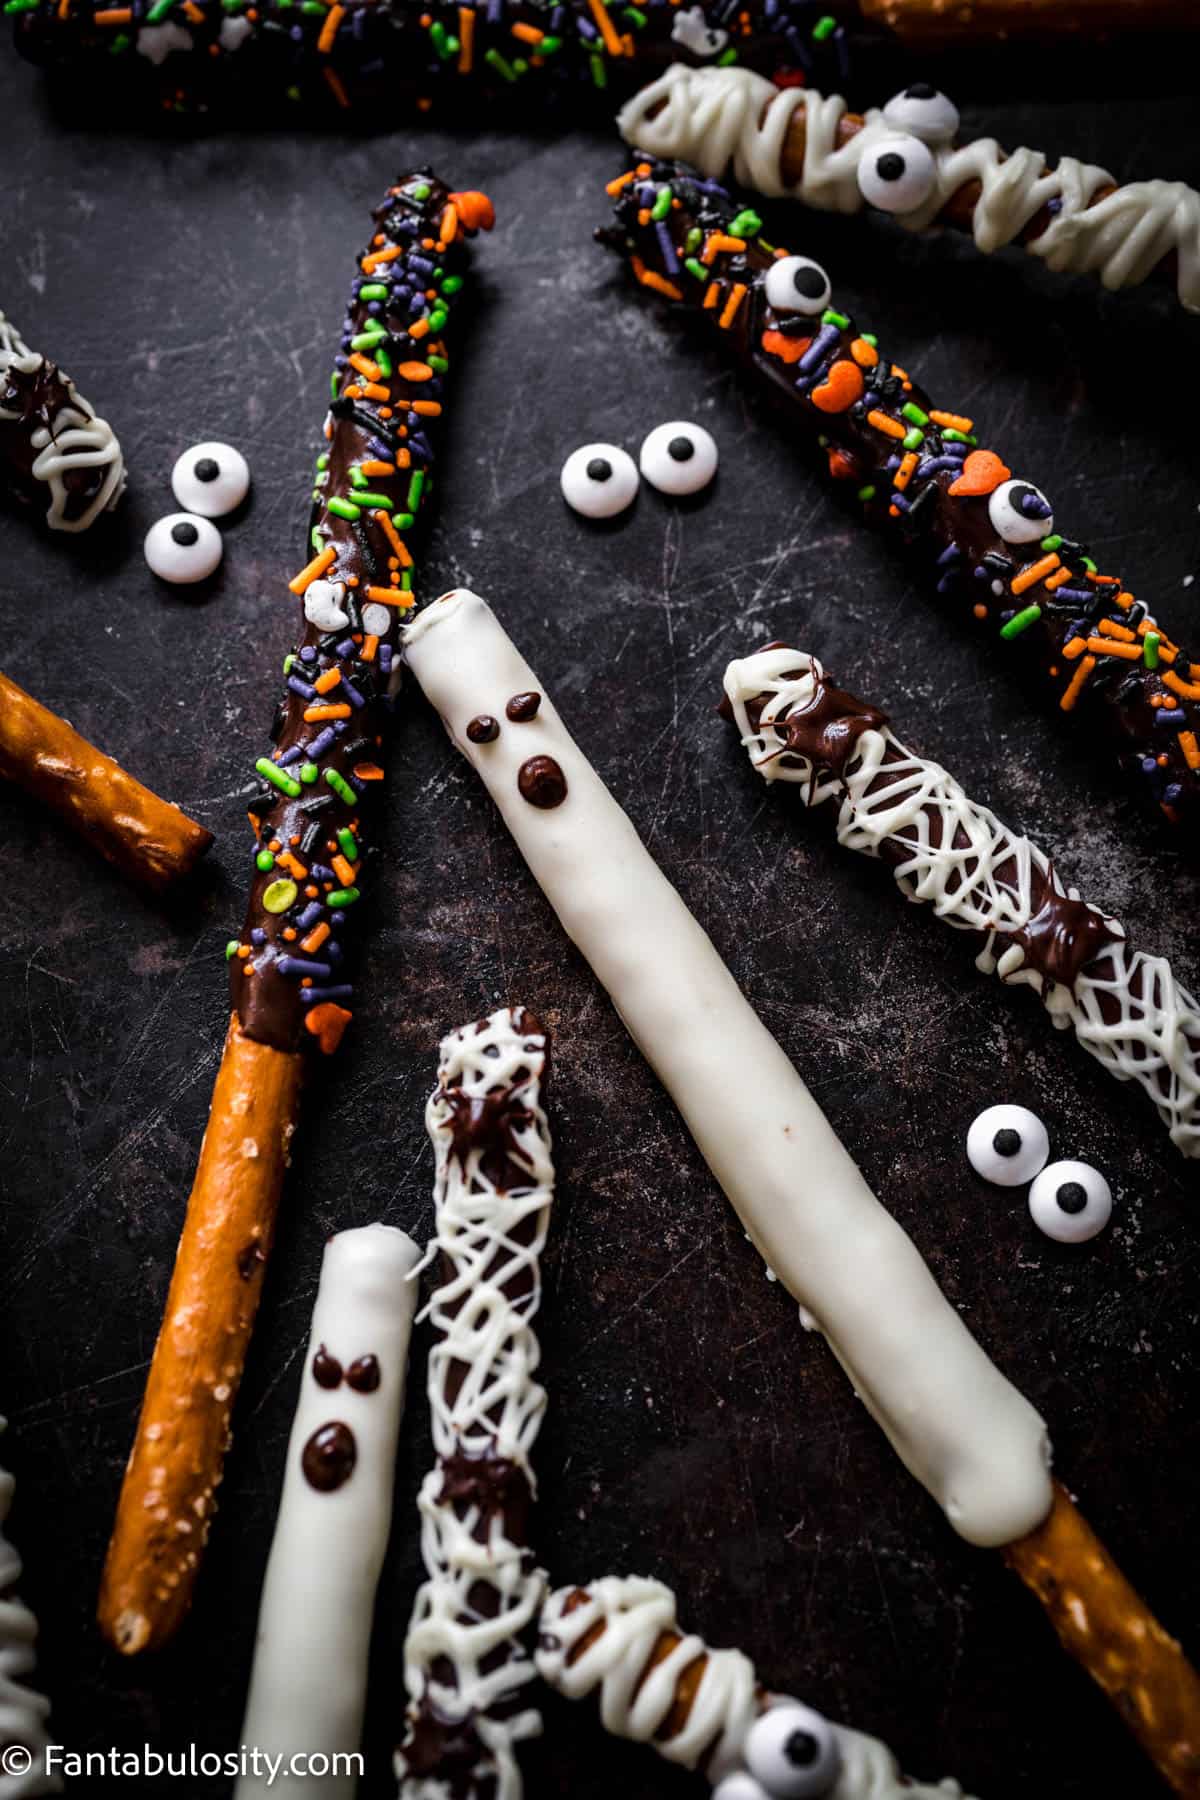 Assorted chocolate dipped pretzel rods decorated in several ways for Halloween are scattered on a black background